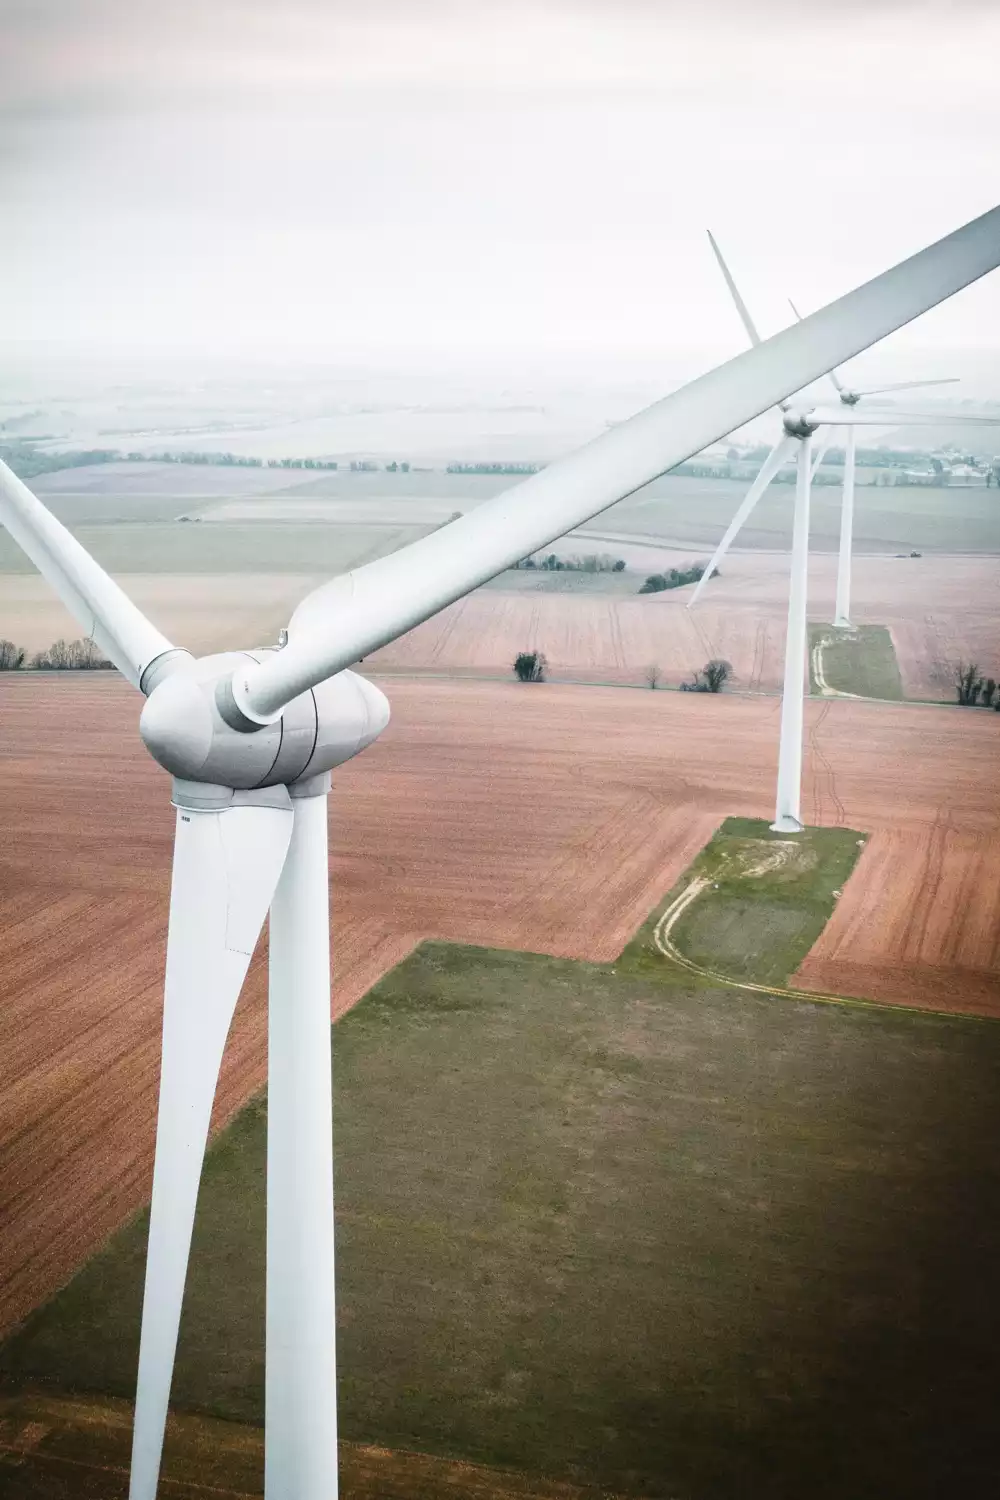 This is an image of a wind turbine farm.